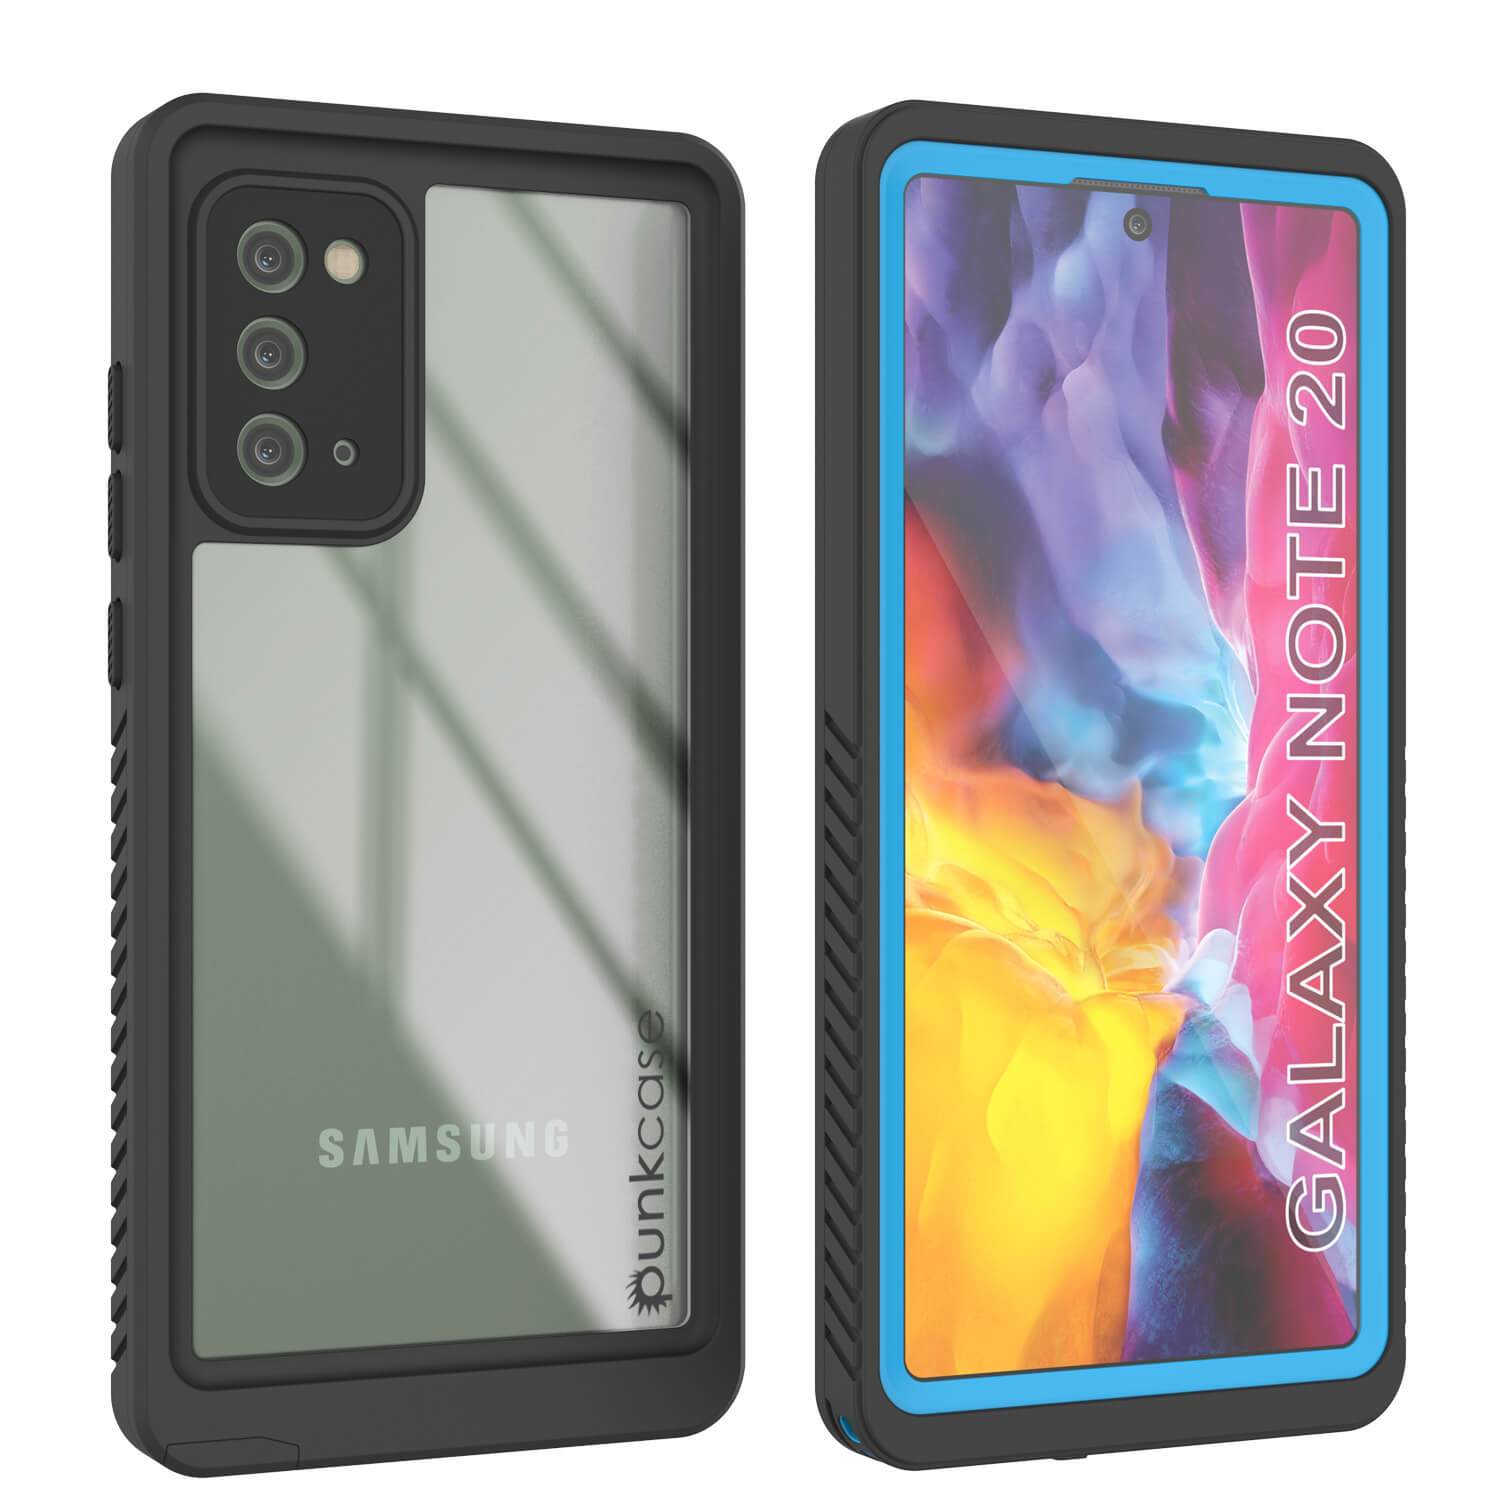 Galaxy Note 20 Case, Punkcase [Extreme Series] Armor Cover W/ Built In Screen Protector [Light Blue]